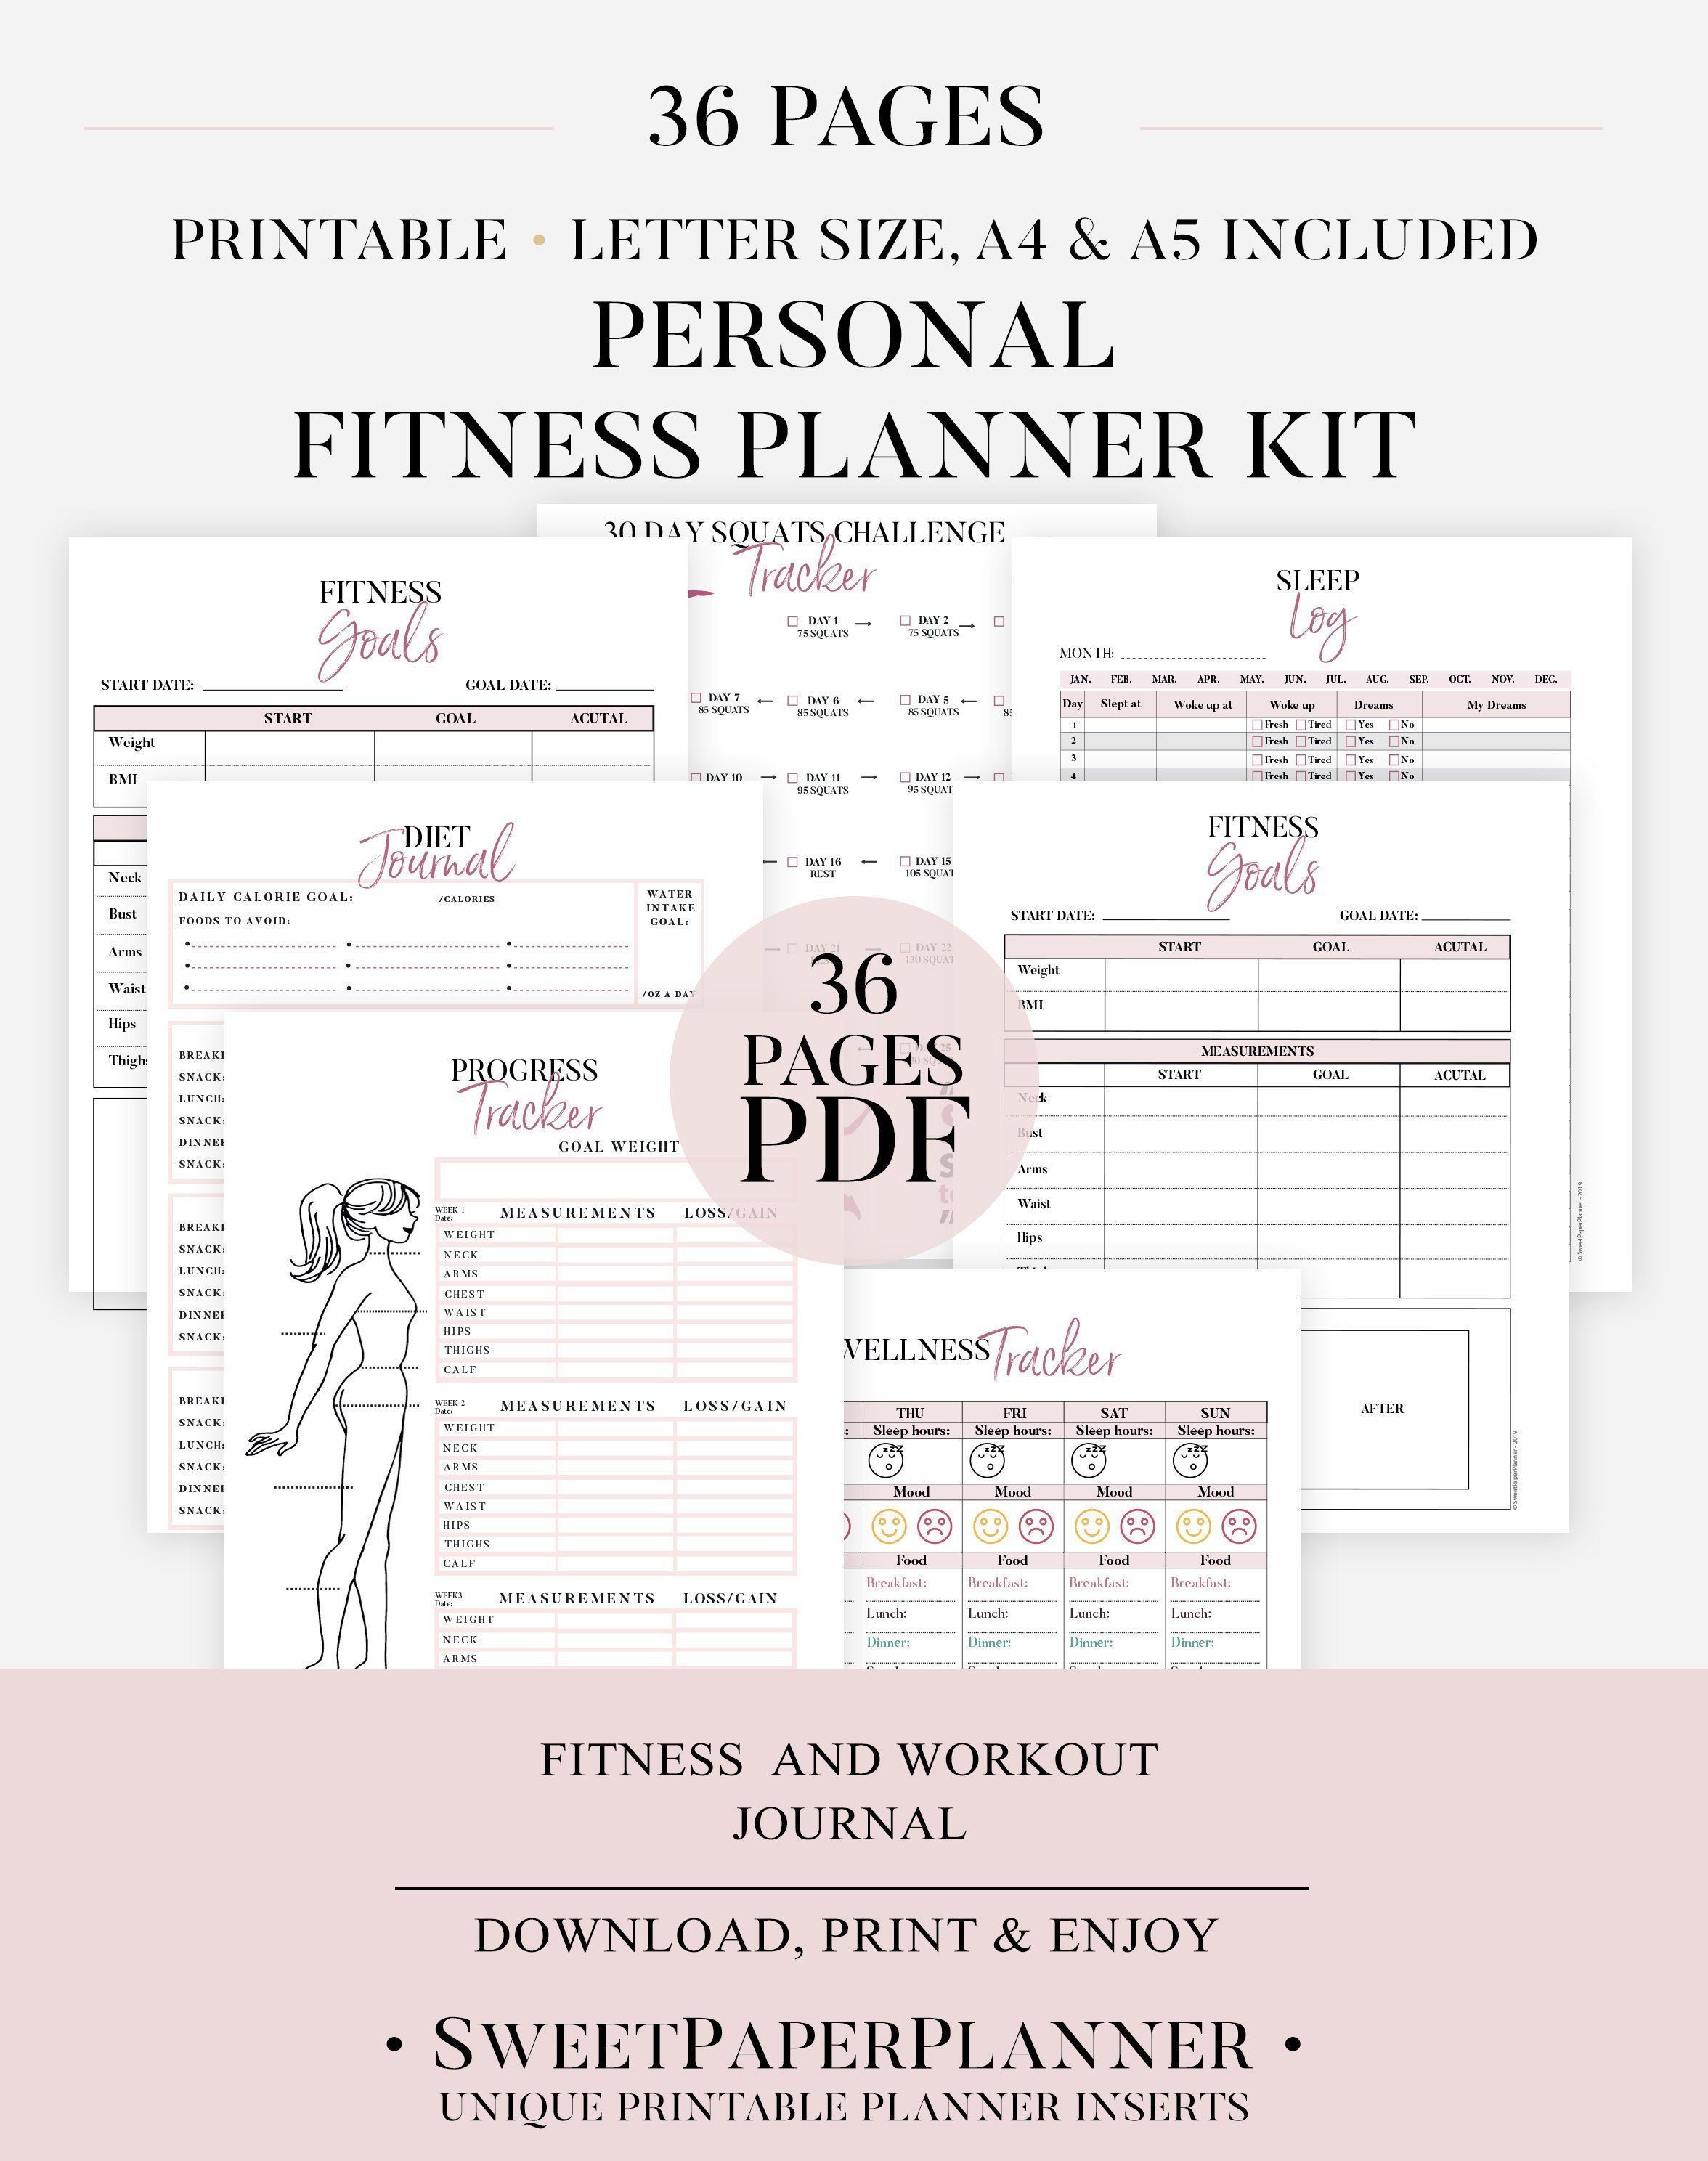 Ultimate Fitness Planner, Printable Health planner Bundle, Fitness Journal, Workout Log, Food And Exercise Tracker, 30 Day Squats Challenge - Ultimate Fitness Planner, Printable Health planner Bundle, Fitness Journal, Workout Log, Food And Exercise Tracker, 30 Day Squats Challenge -   12 fitness Planner download ideas